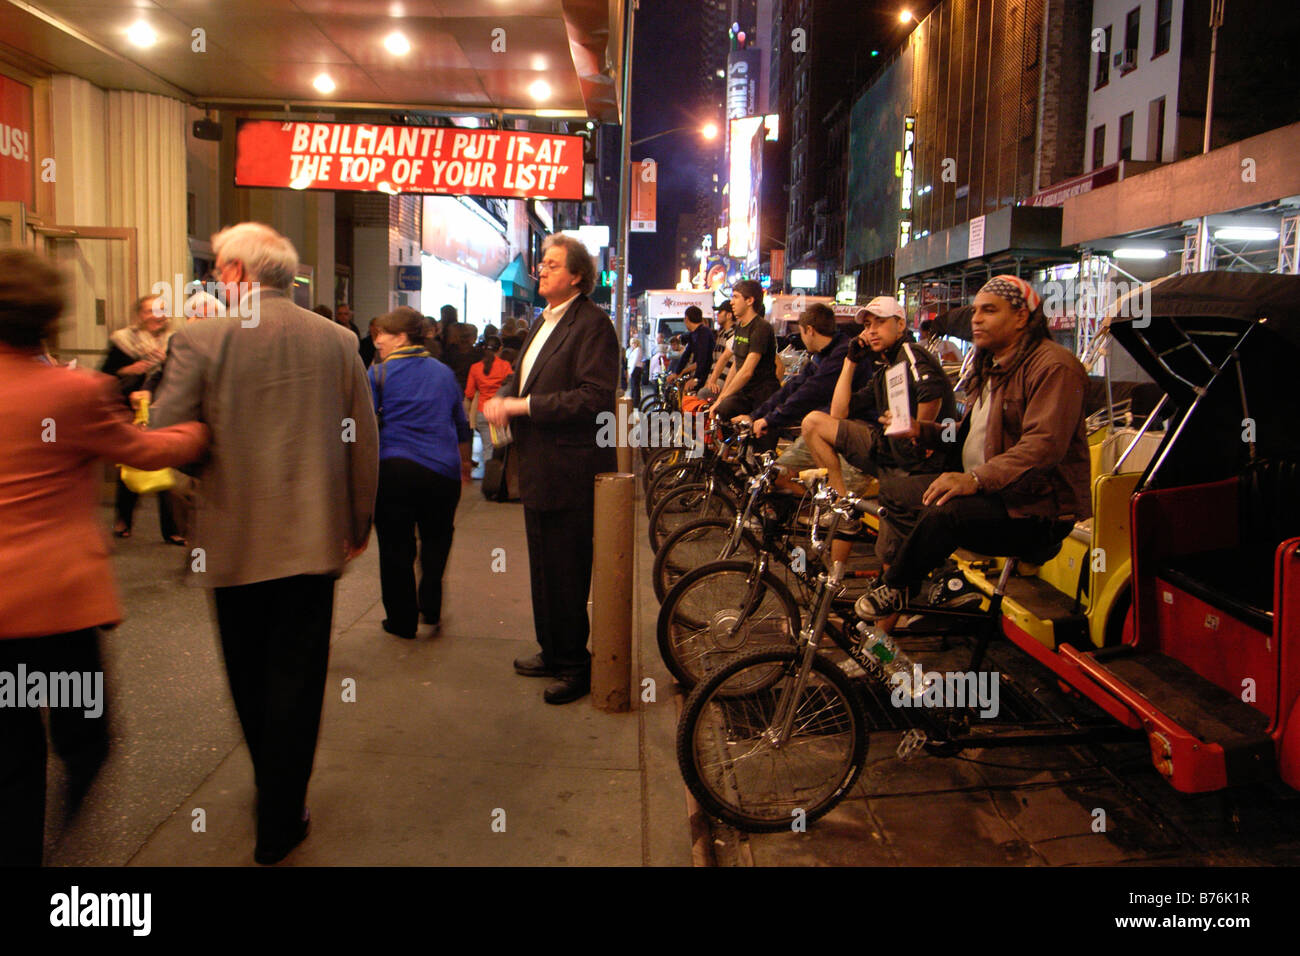 Pedicabs line up outside a Broadway theatre as the audience leaves after a performance in New York City theatre district Stock Photo